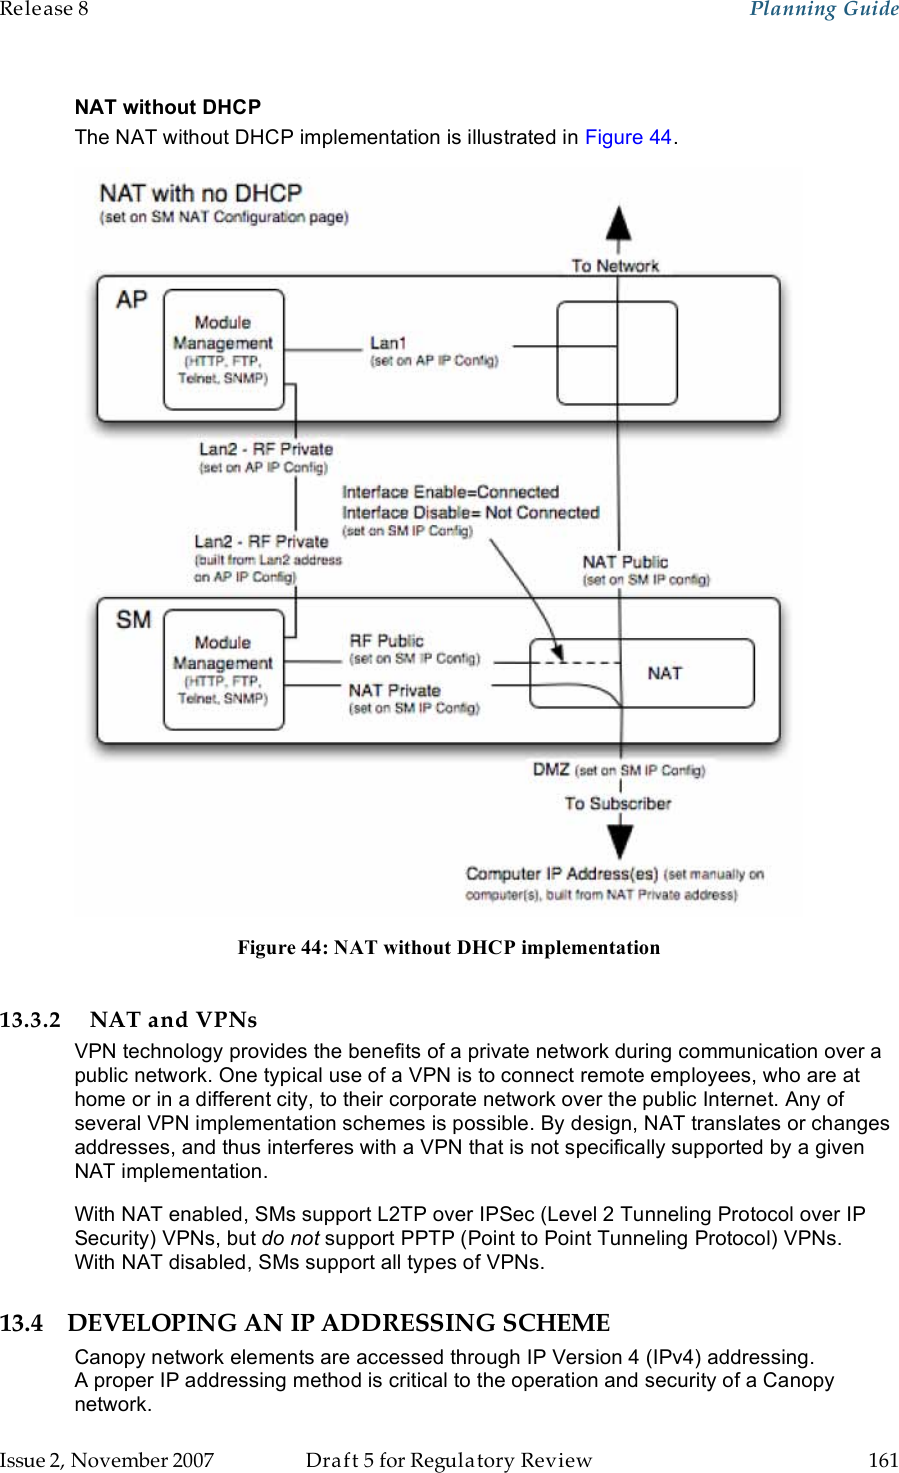 Release 8    Planning Guide                  March 200                  Through Software Release 6.   Issue 2, November 2007  Draft 5 for Regulatory Review  161     NAT without DHCP The NAT without DHCP implementation is illustrated in Figure 44.  Figure 44: NAT without DHCP implementation  13.3.2 NAT and VPNs VPN technology provides the benefits of a private network during communication over a public network. One typical use of a VPN is to connect remote employees, who are at home or in a different city, to their corporate network over the public Internet. Any of several VPN implementation schemes is possible. By design, NAT translates or changes addresses, and thus interferes with a VPN that is not specifically supported by a given NAT implementation. With NAT enabled, SMs support L2TP over IPSec (Level 2 Tunneling Protocol over IP Security) VPNs, but do not support PPTP (Point to Point Tunneling Protocol) VPNs. With NAT disabled, SMs support all types of VPNs. 13.4 DEVELOPING AN IP ADDRESSING SCHEME Canopy network elements are accessed through IP Version 4 (IPv4) addressing.  A proper IP addressing method is critical to the operation and security of a Canopy network. 